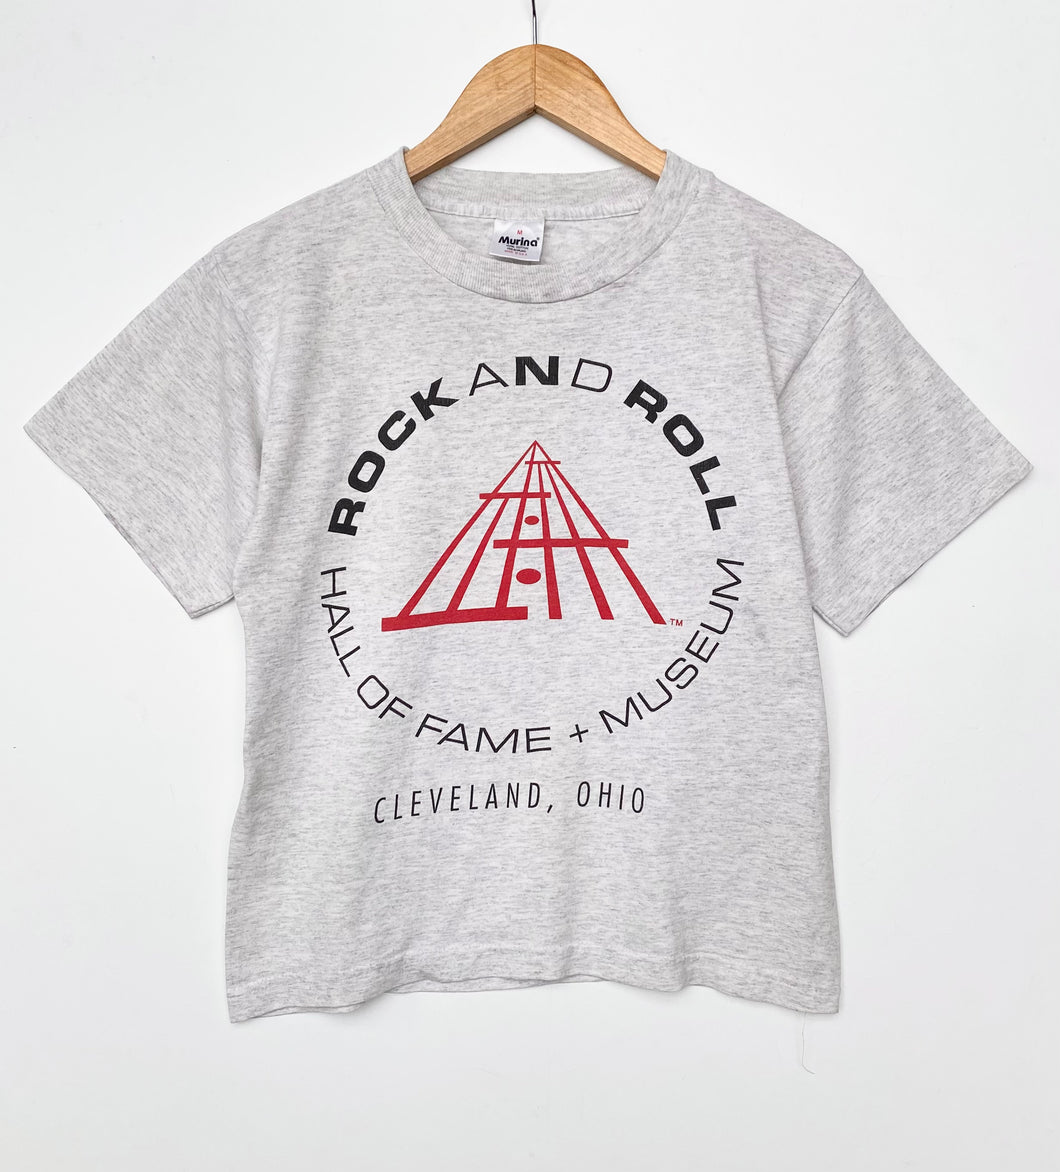 Women’s Rock and Roll Museum Ohio T-shirt (M)